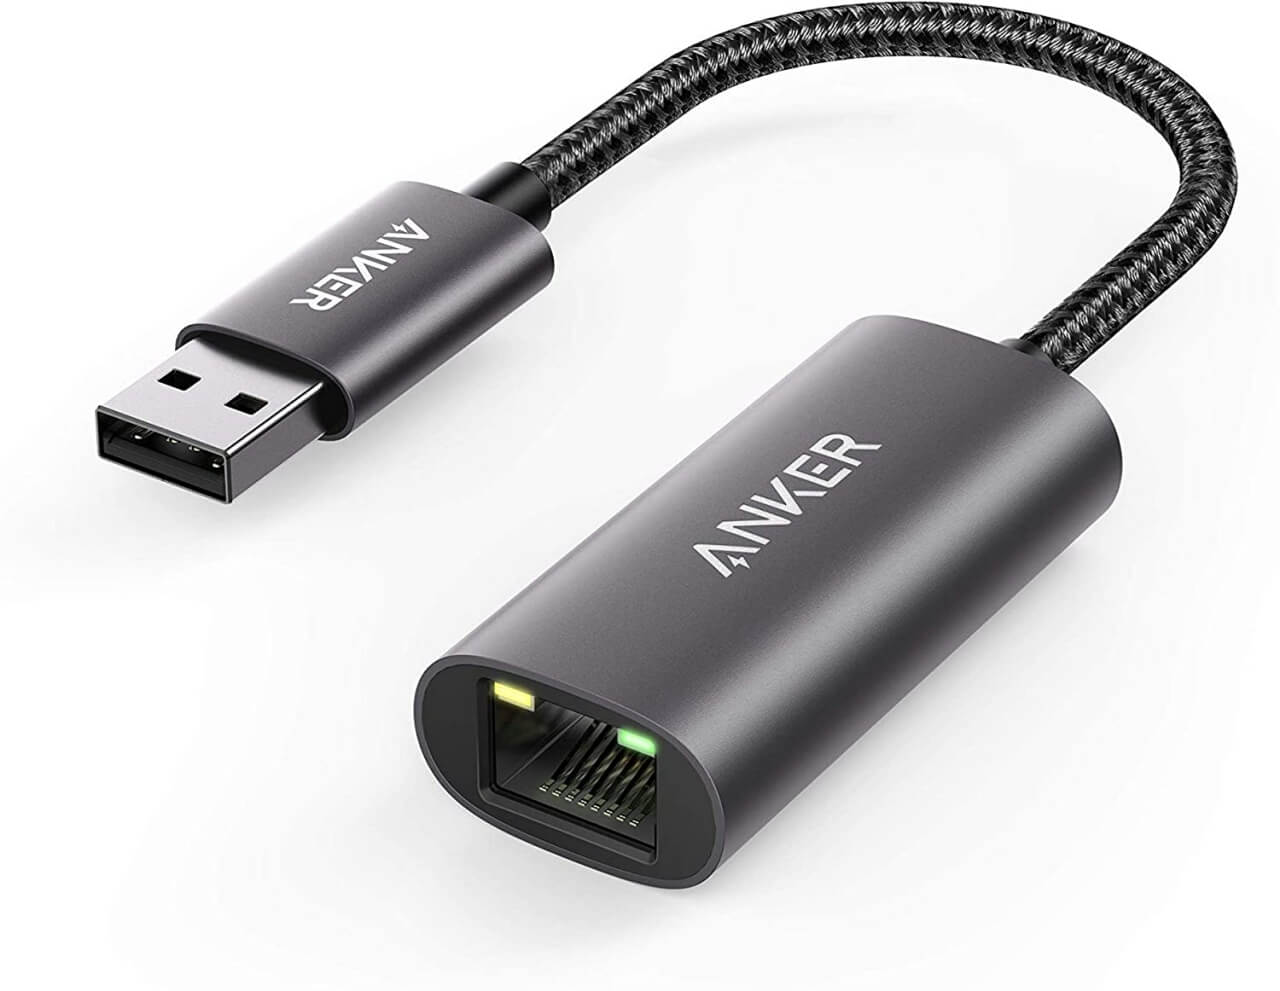 Anker USB3.0 to Ethernet Adapter